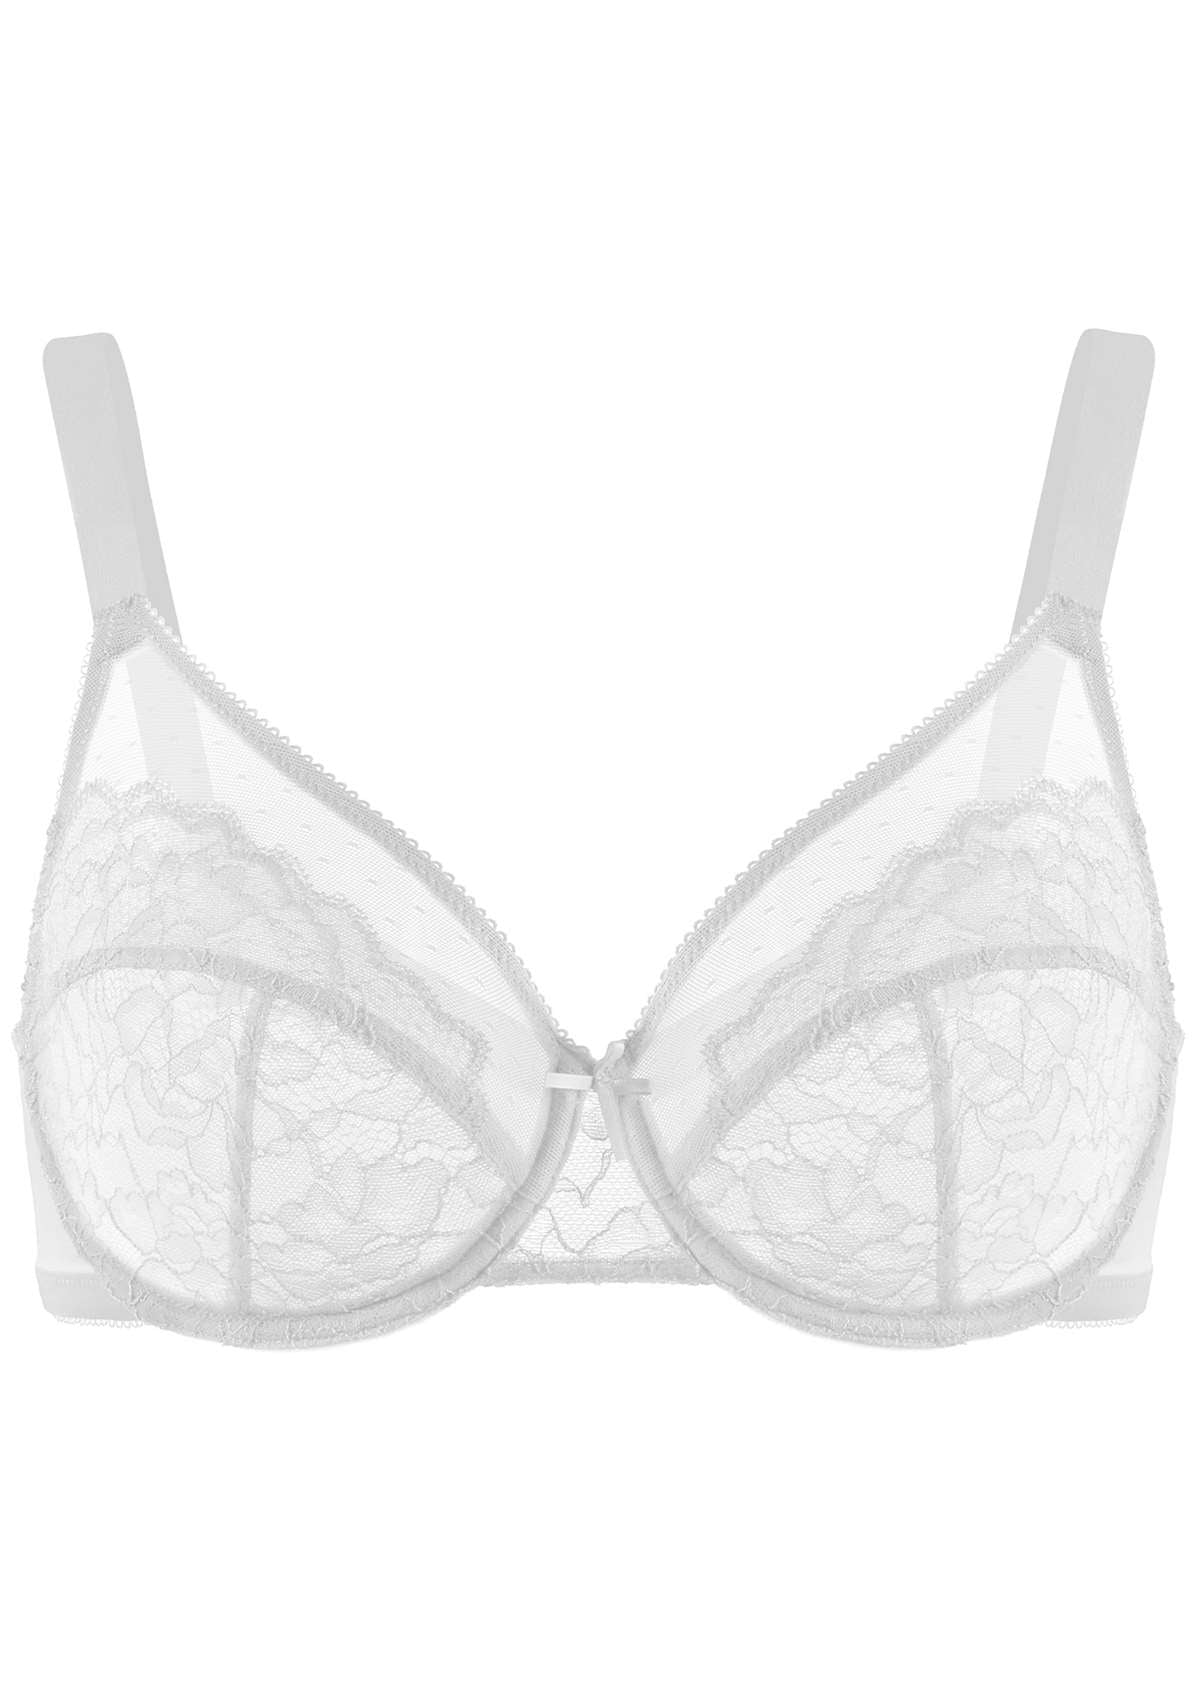 HSIA Enchante Lace Bra And Panties Set: Back Support Bra For Posture - Light Gray / 36 / D